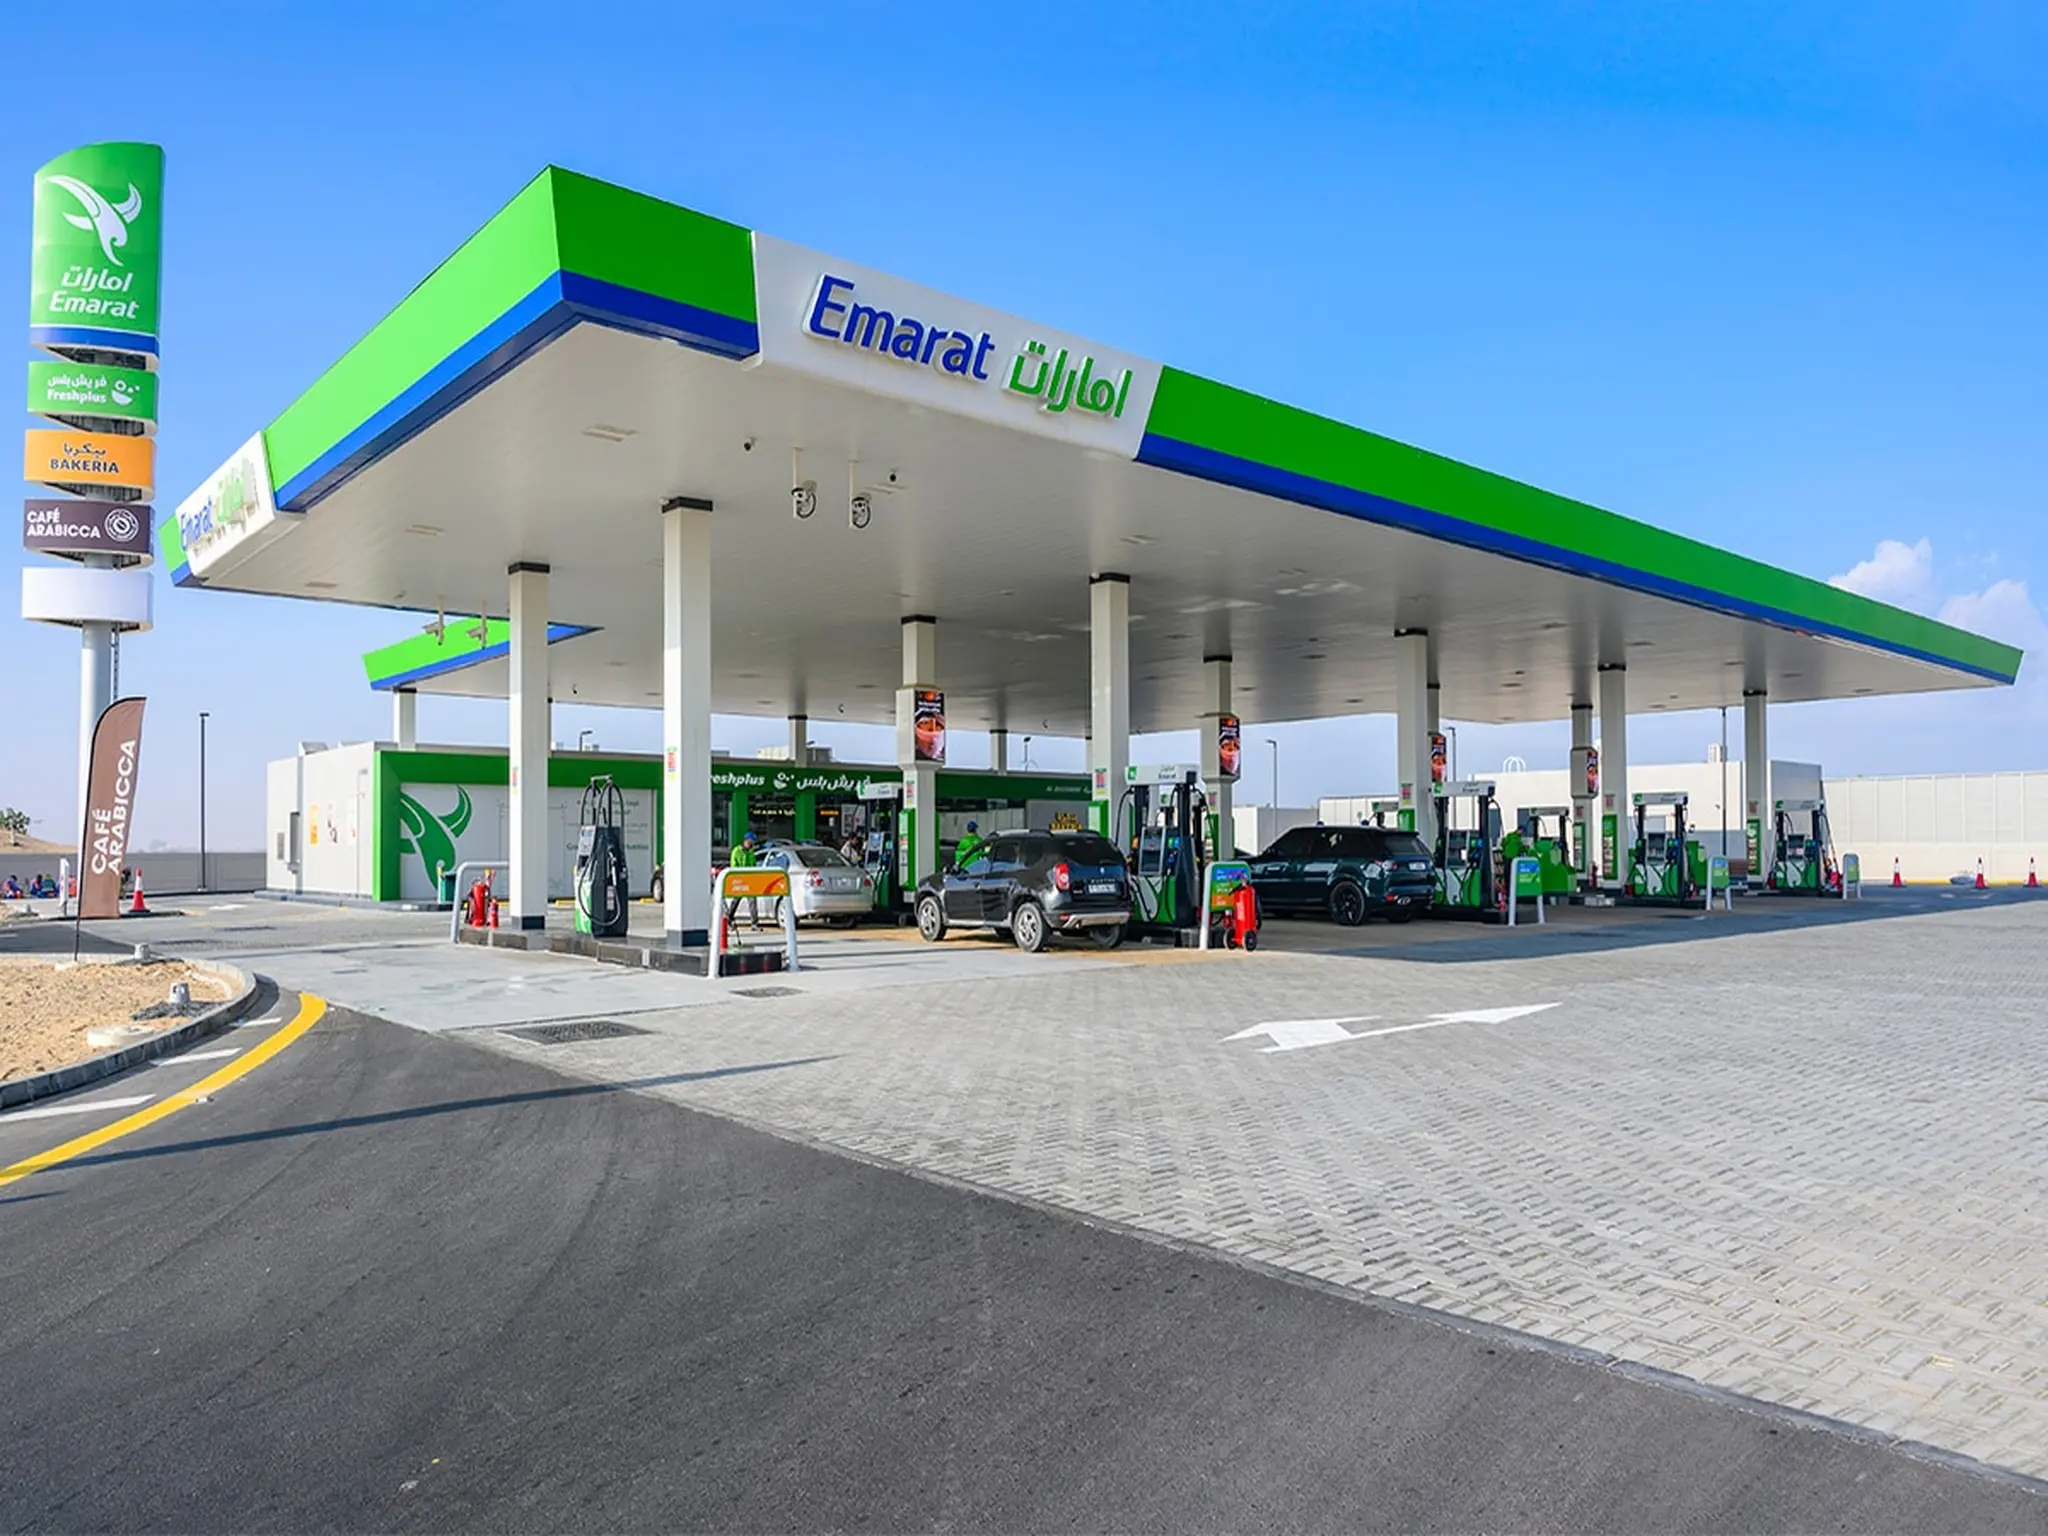 UAE announced an increase in the price of petrol effective May 2023